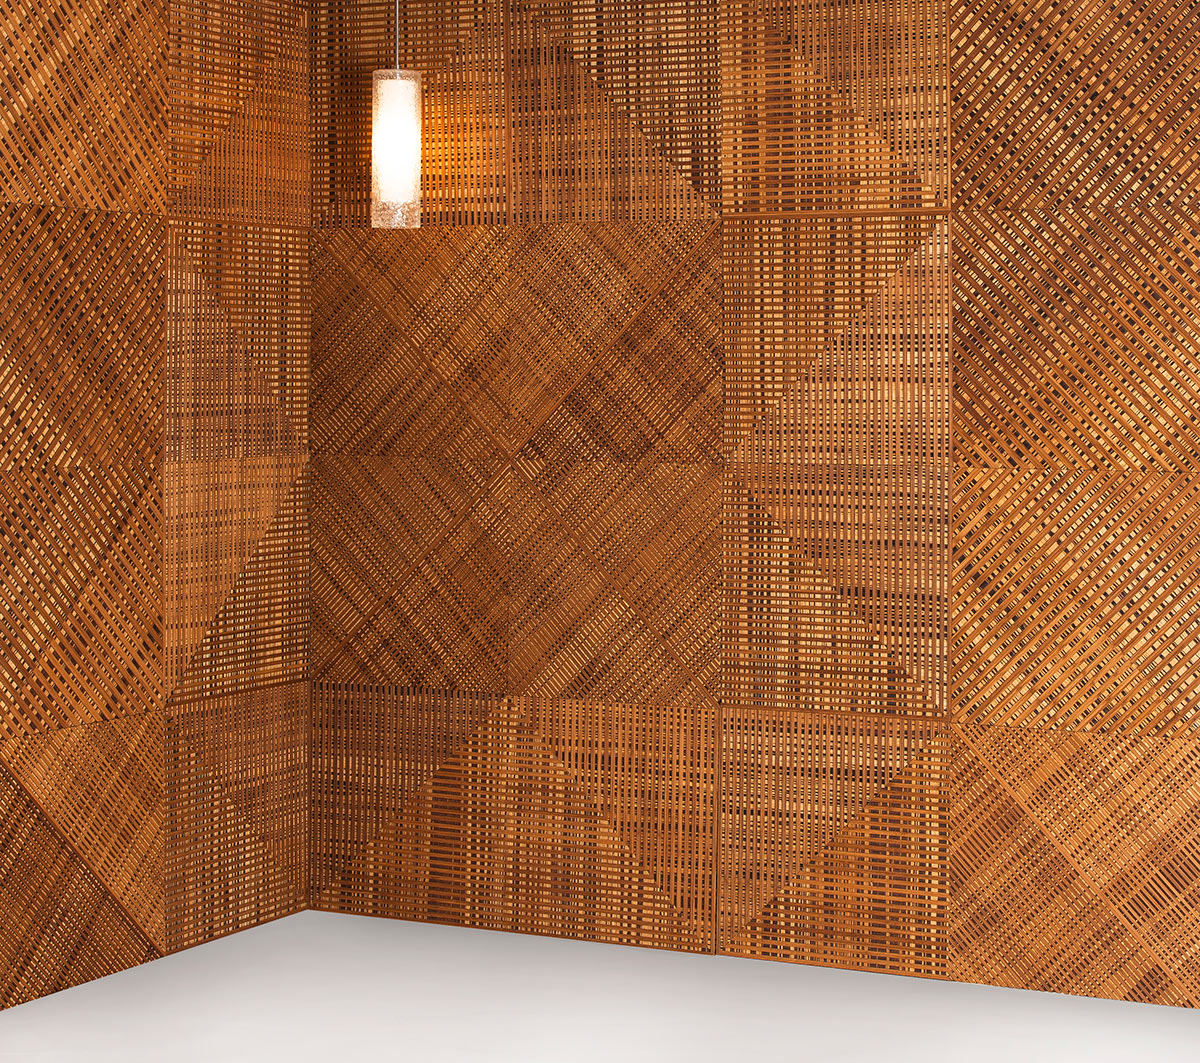 Plyboo Fractal Wall Panels from Smith & Fong